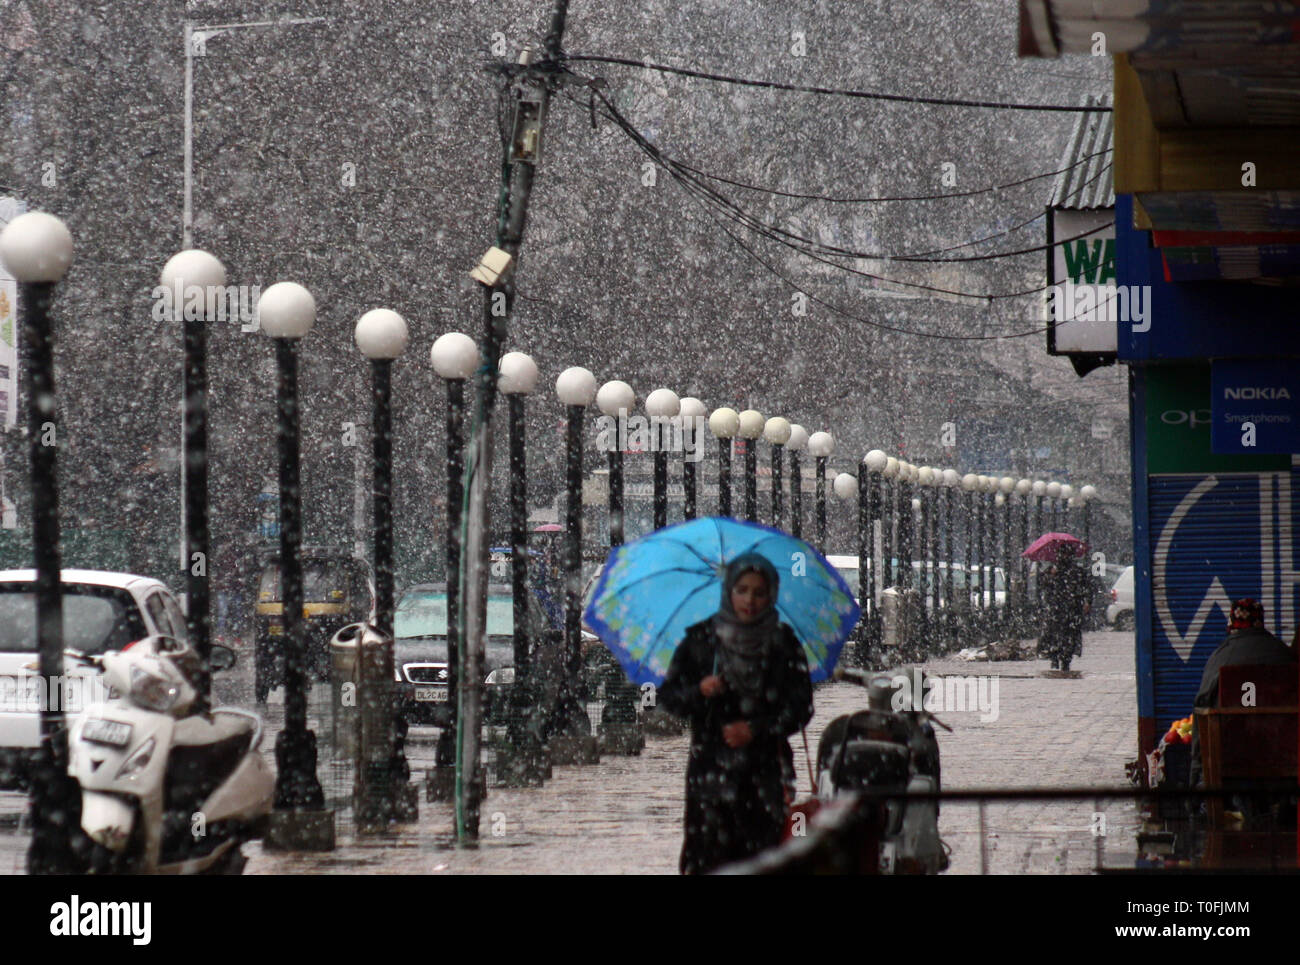 Srinagar, Kashmir. 20th March, 2019. A Kashmiri Girl holds umbrella as its fresh snow fall .Life in valley was affected on Wednesday due to a strike called by separatists to protest against the custodial death of a youth.©Sofi Suhail/Alamy Live News Stock Photo